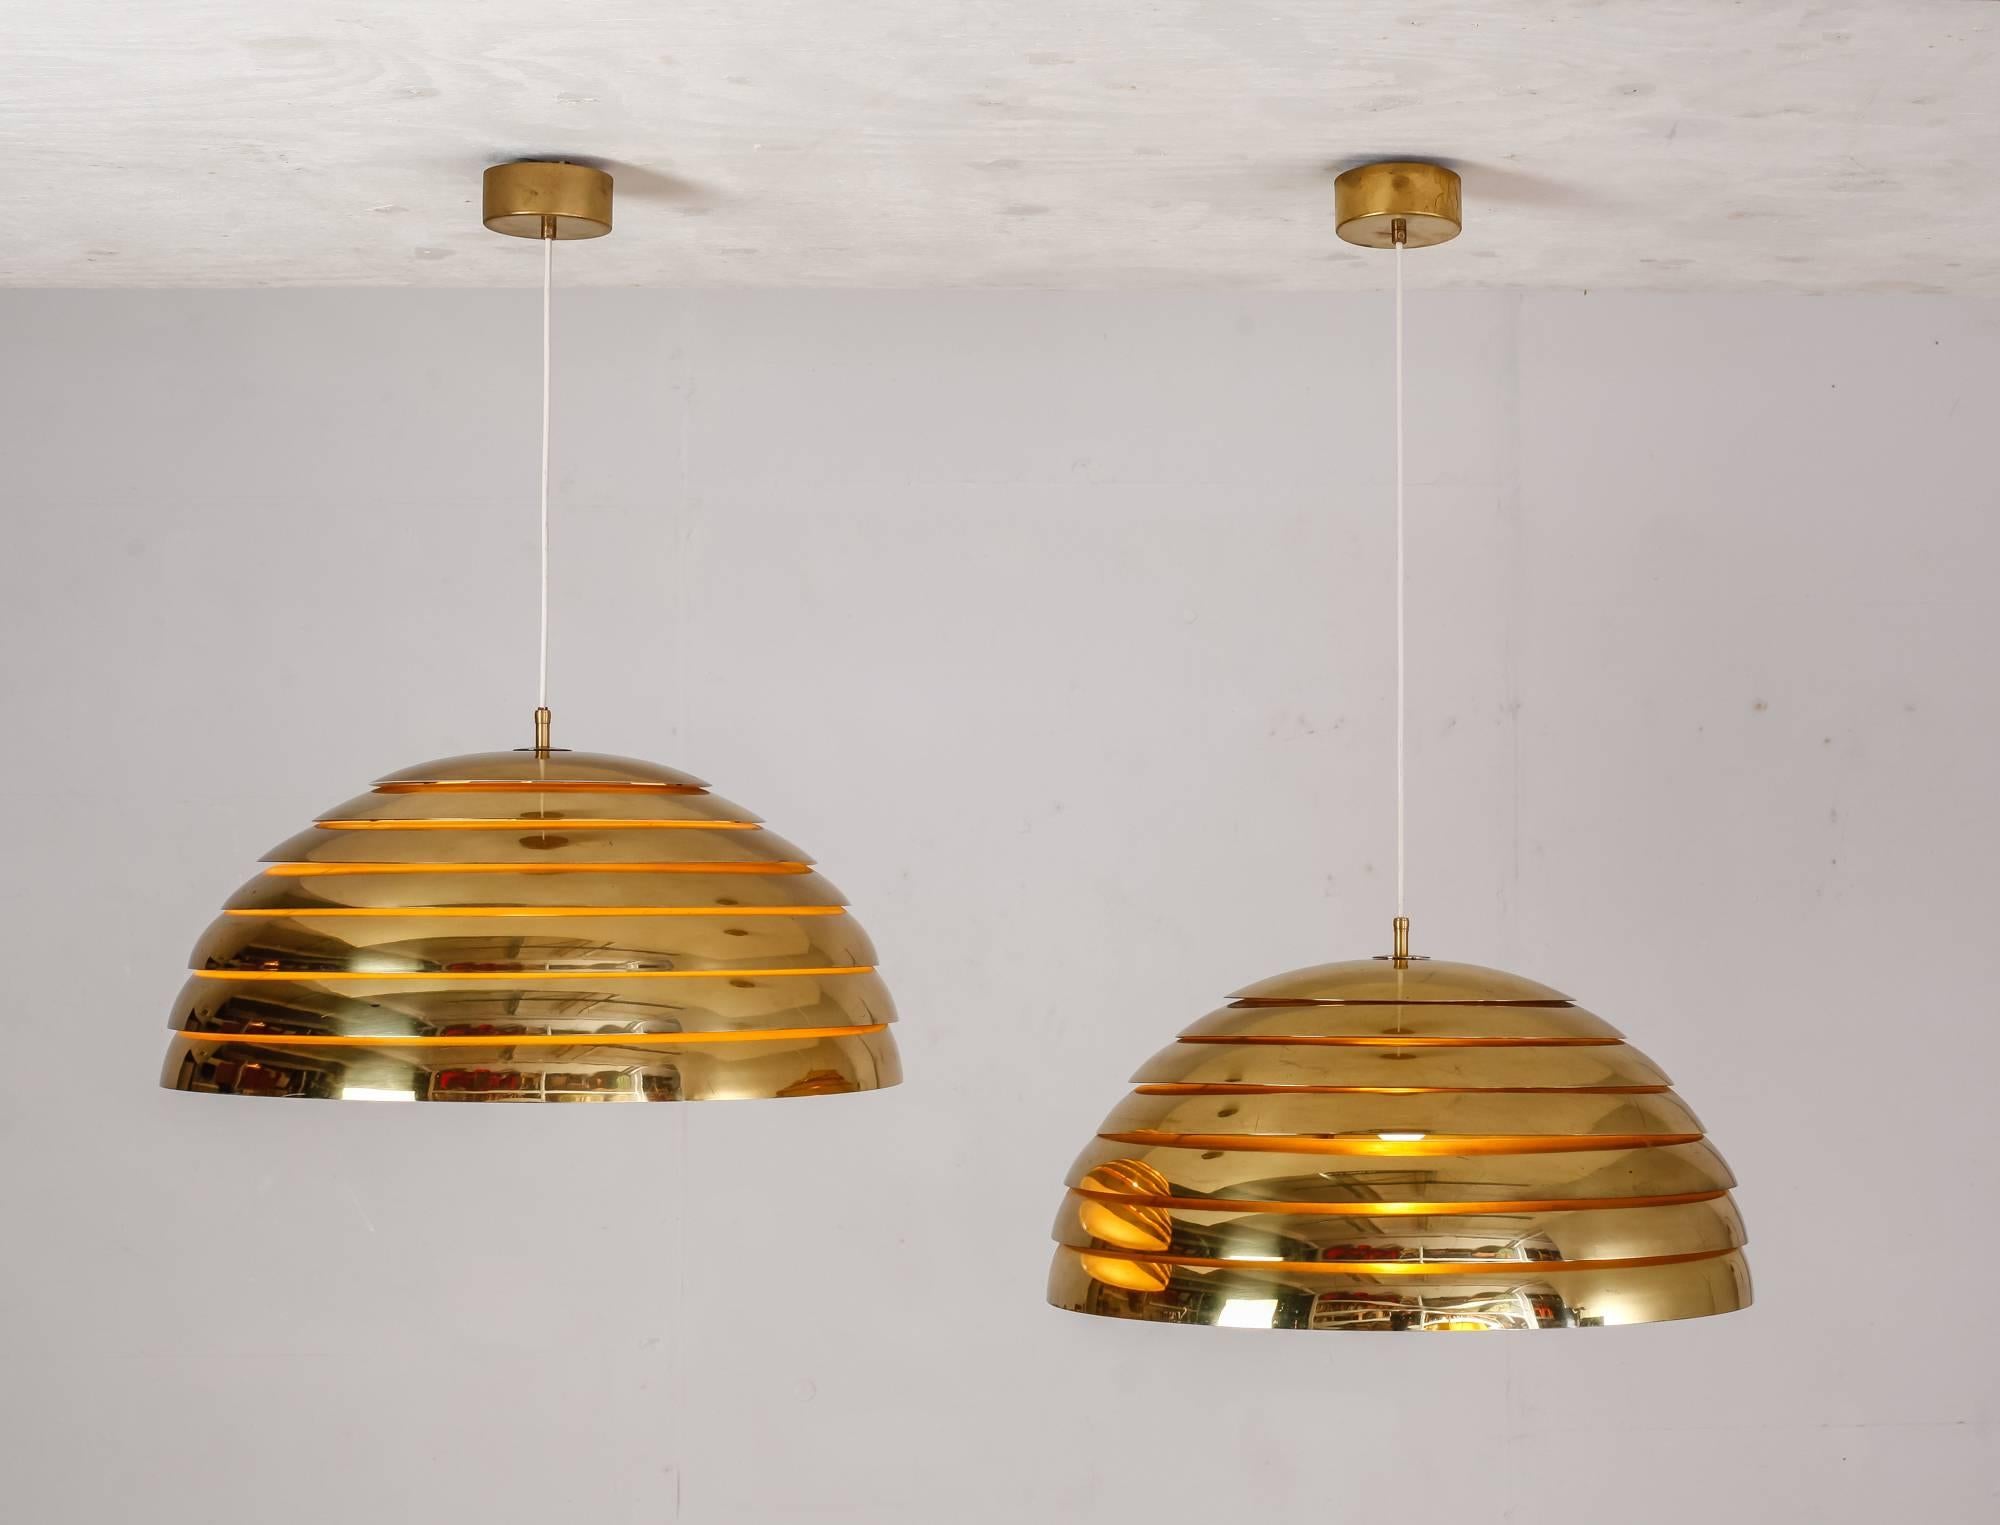 A pair of beautiful late 1960s-early 1970s large brass pendant lamps from Germany. The pendants are made of seven brass rings with a plexiglass diffuser and are in a perfect condition.
The combination of the soft downwards light and the warm glow